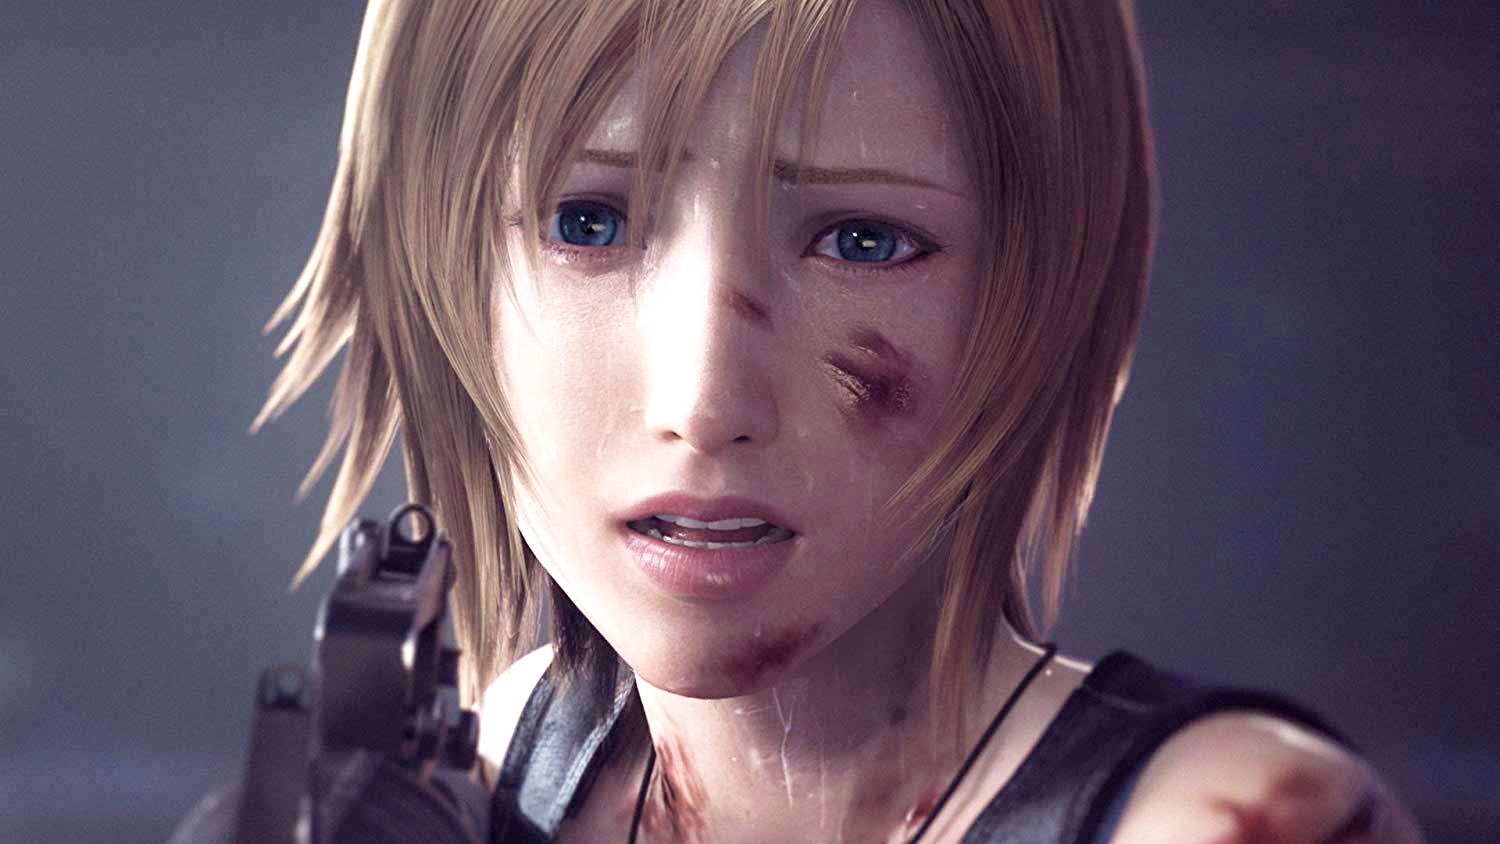 Remake This! Parasite Eve